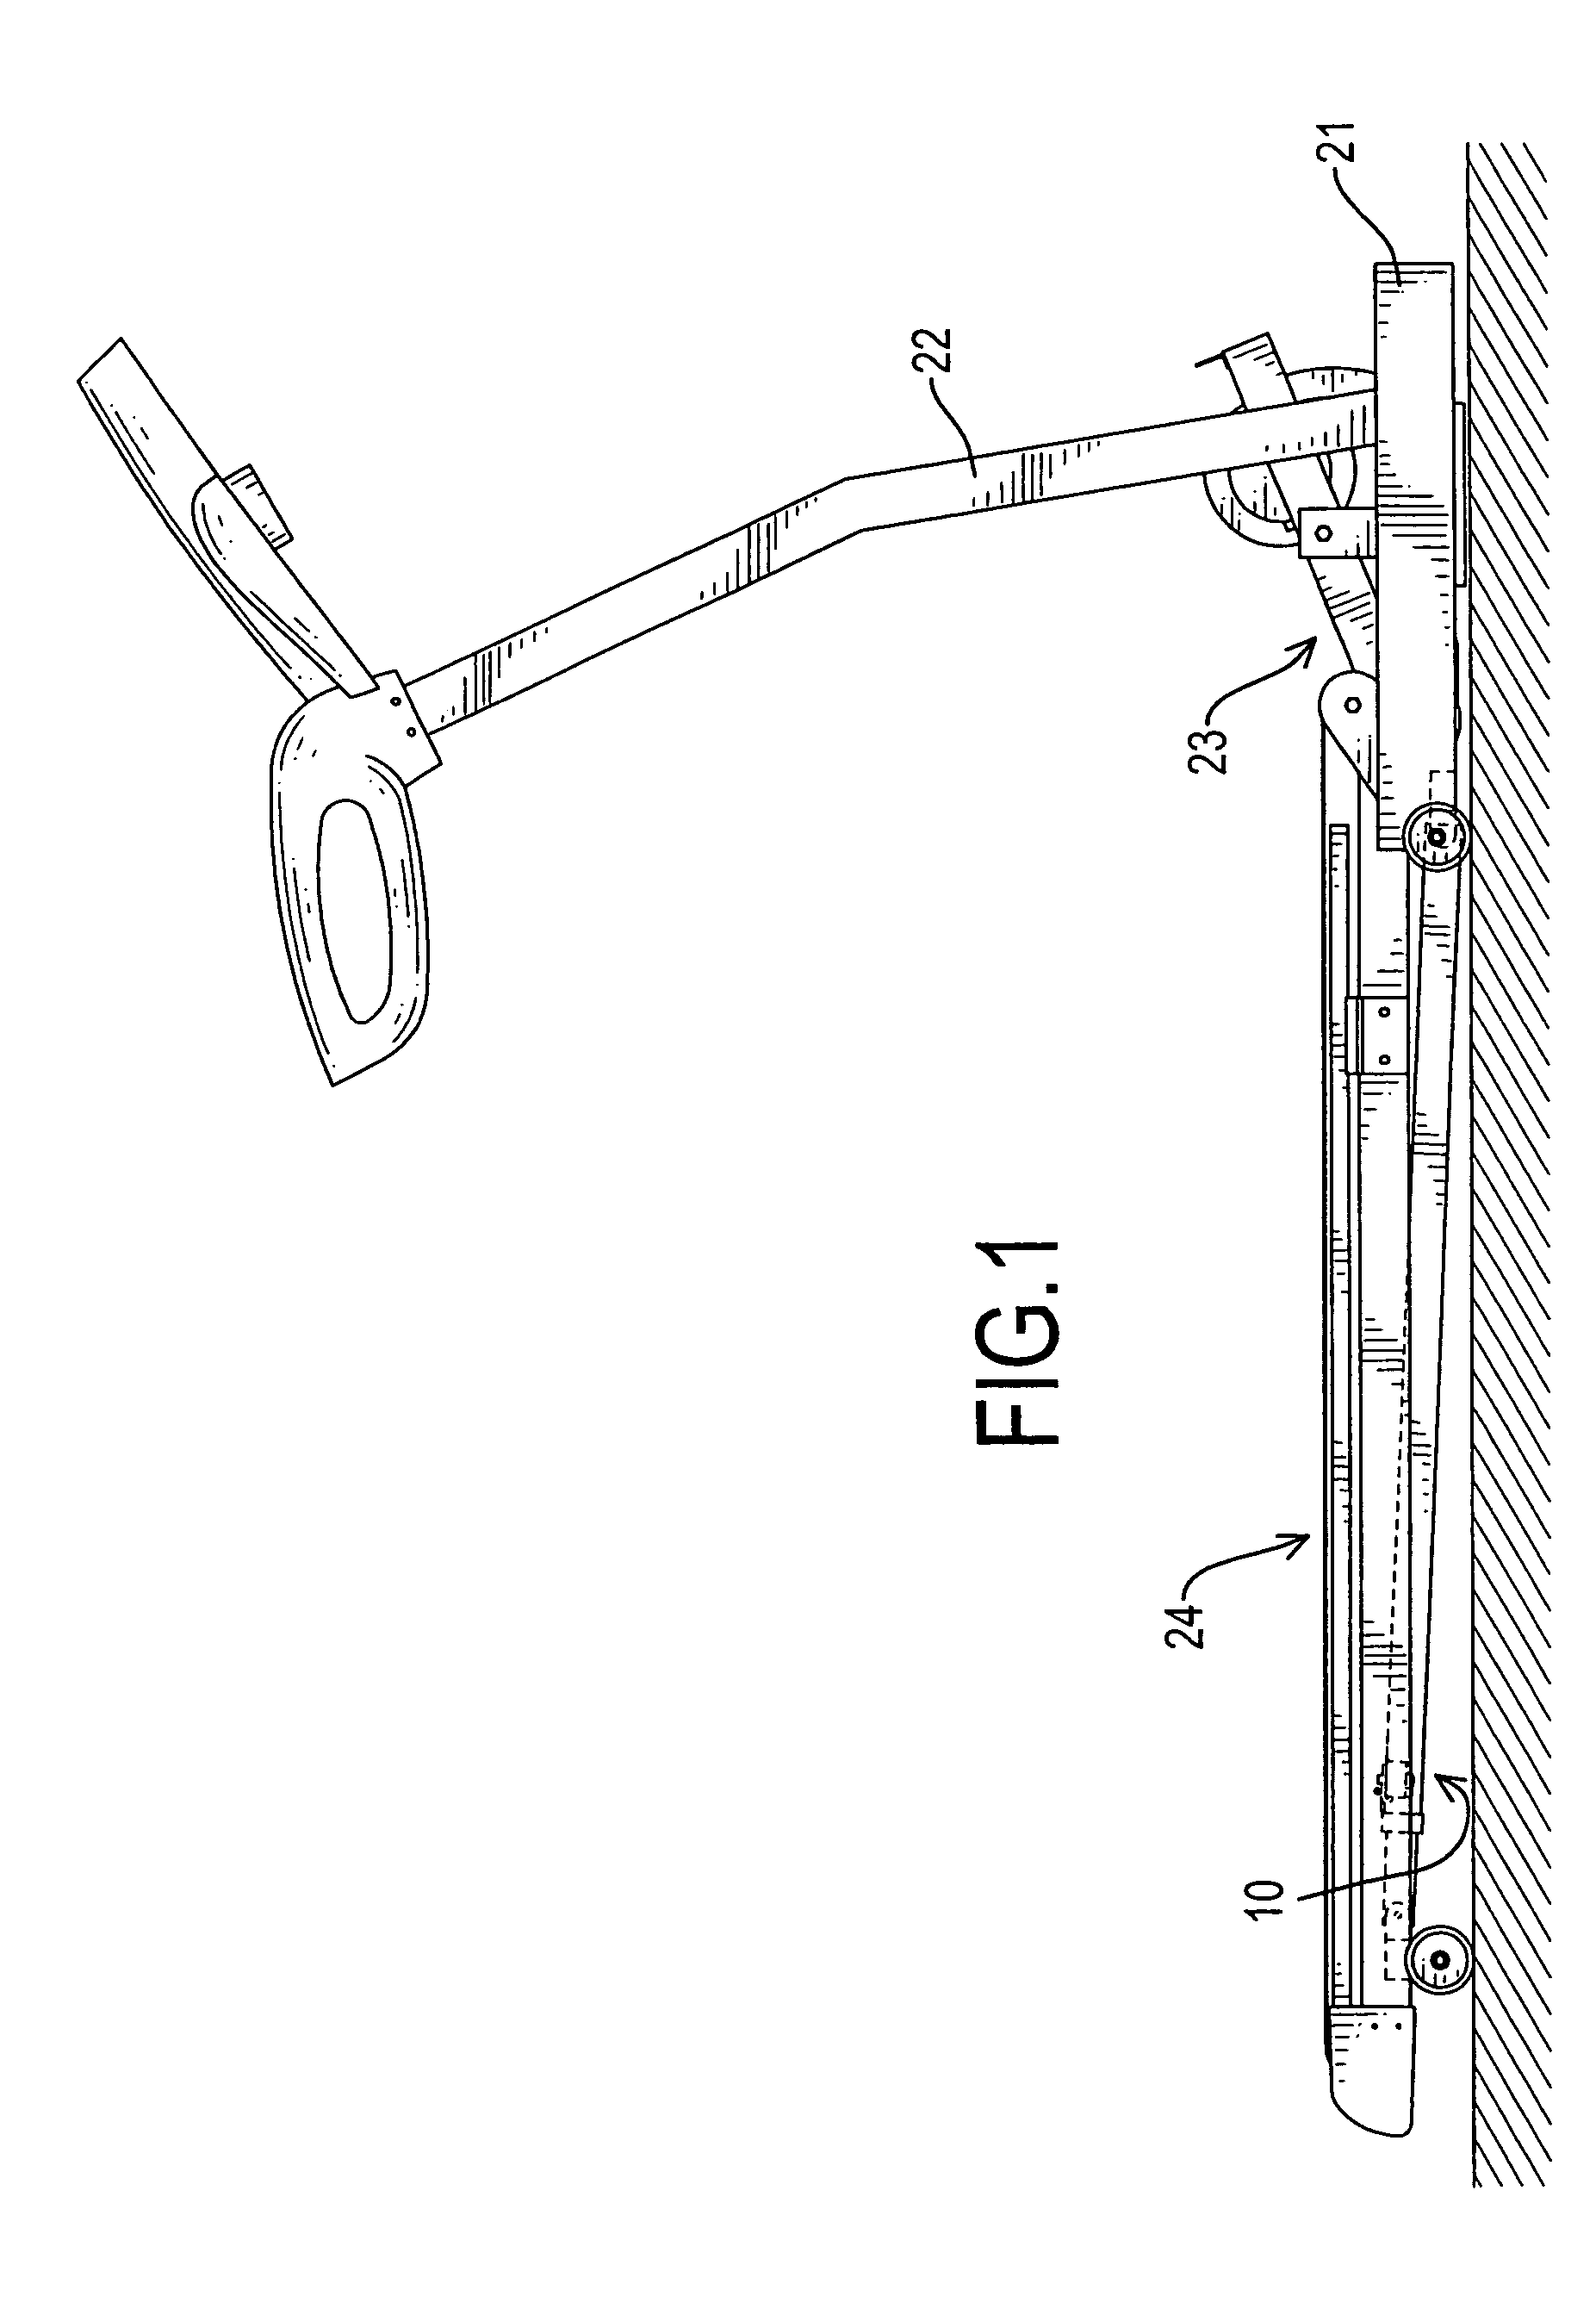 Locking device to lock a collapsible treadmill deck in a folded position